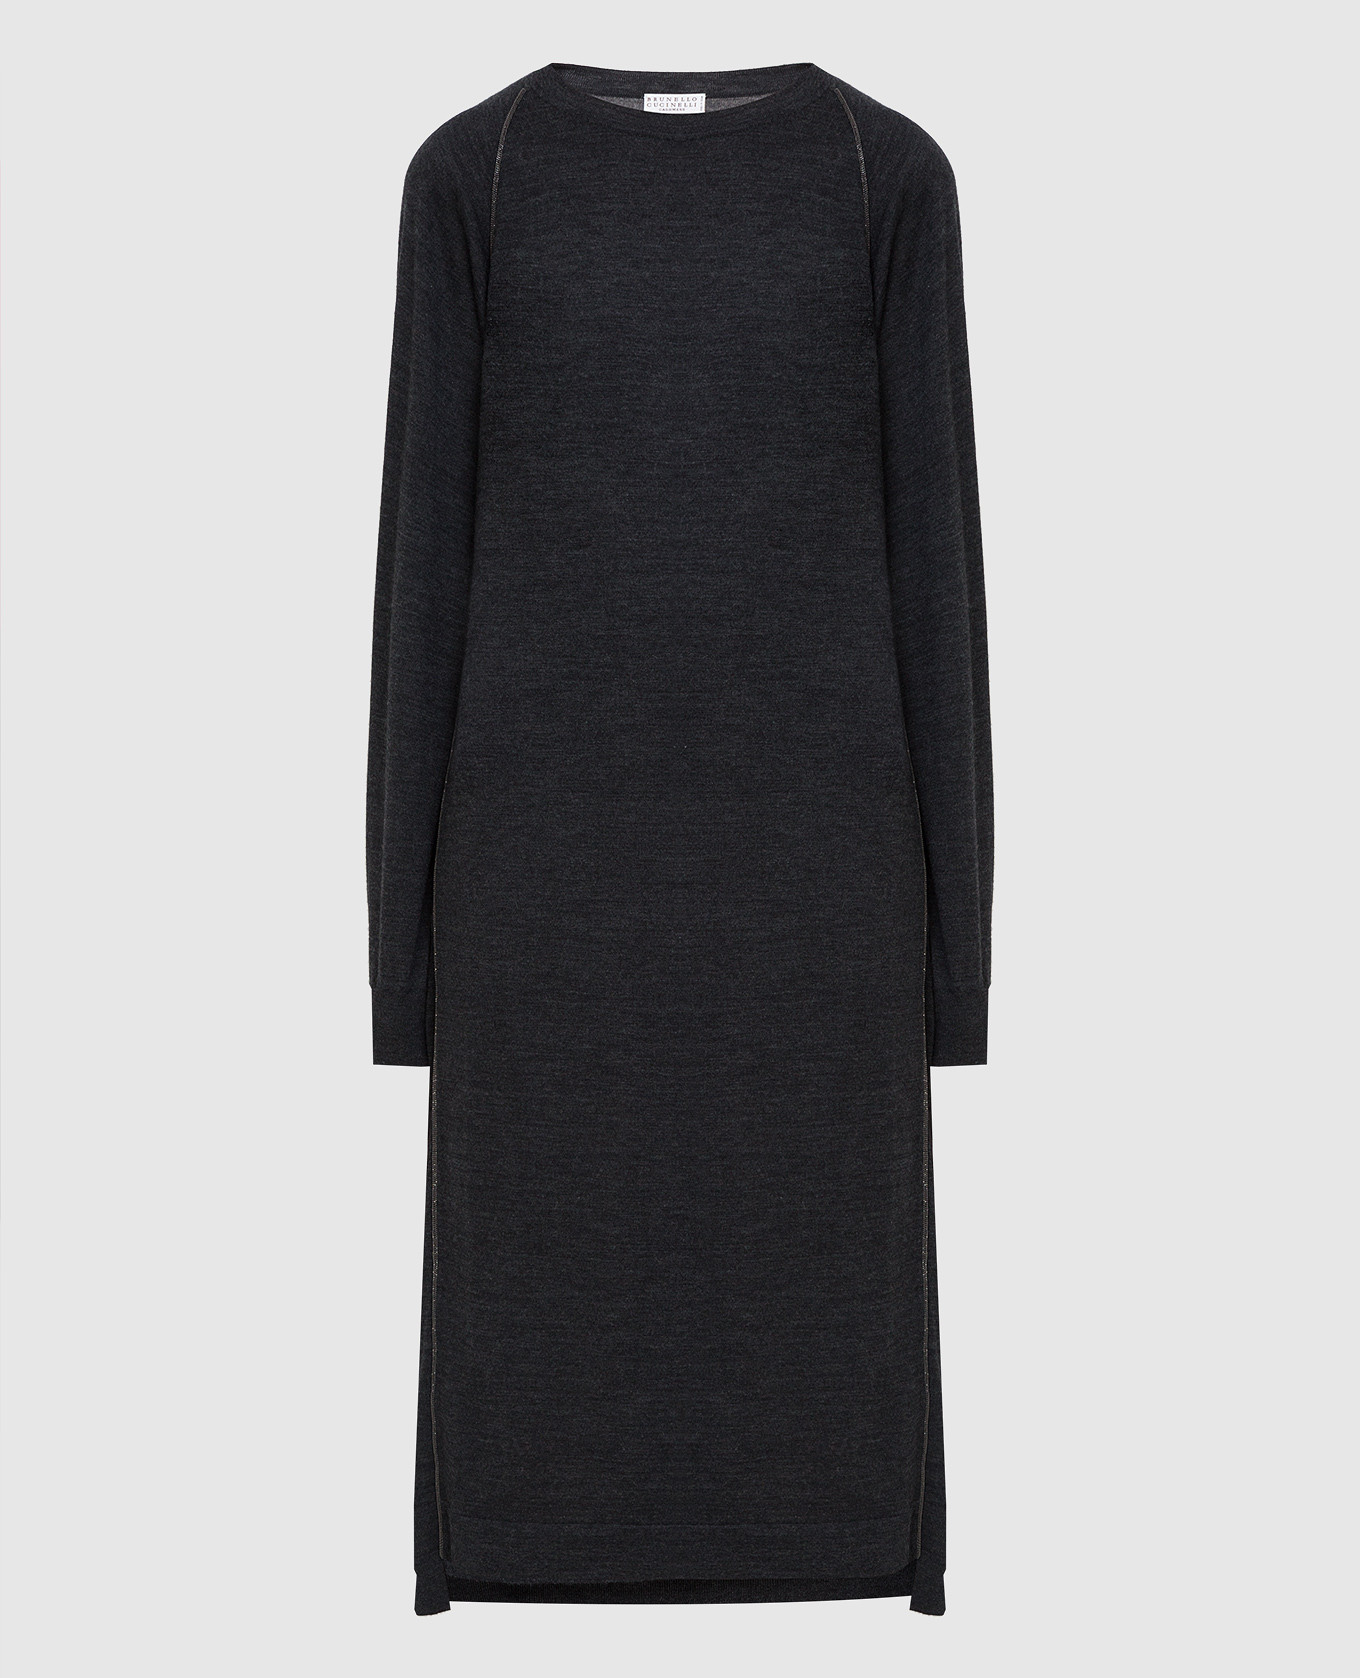 Charcoal wool and cashmere dress